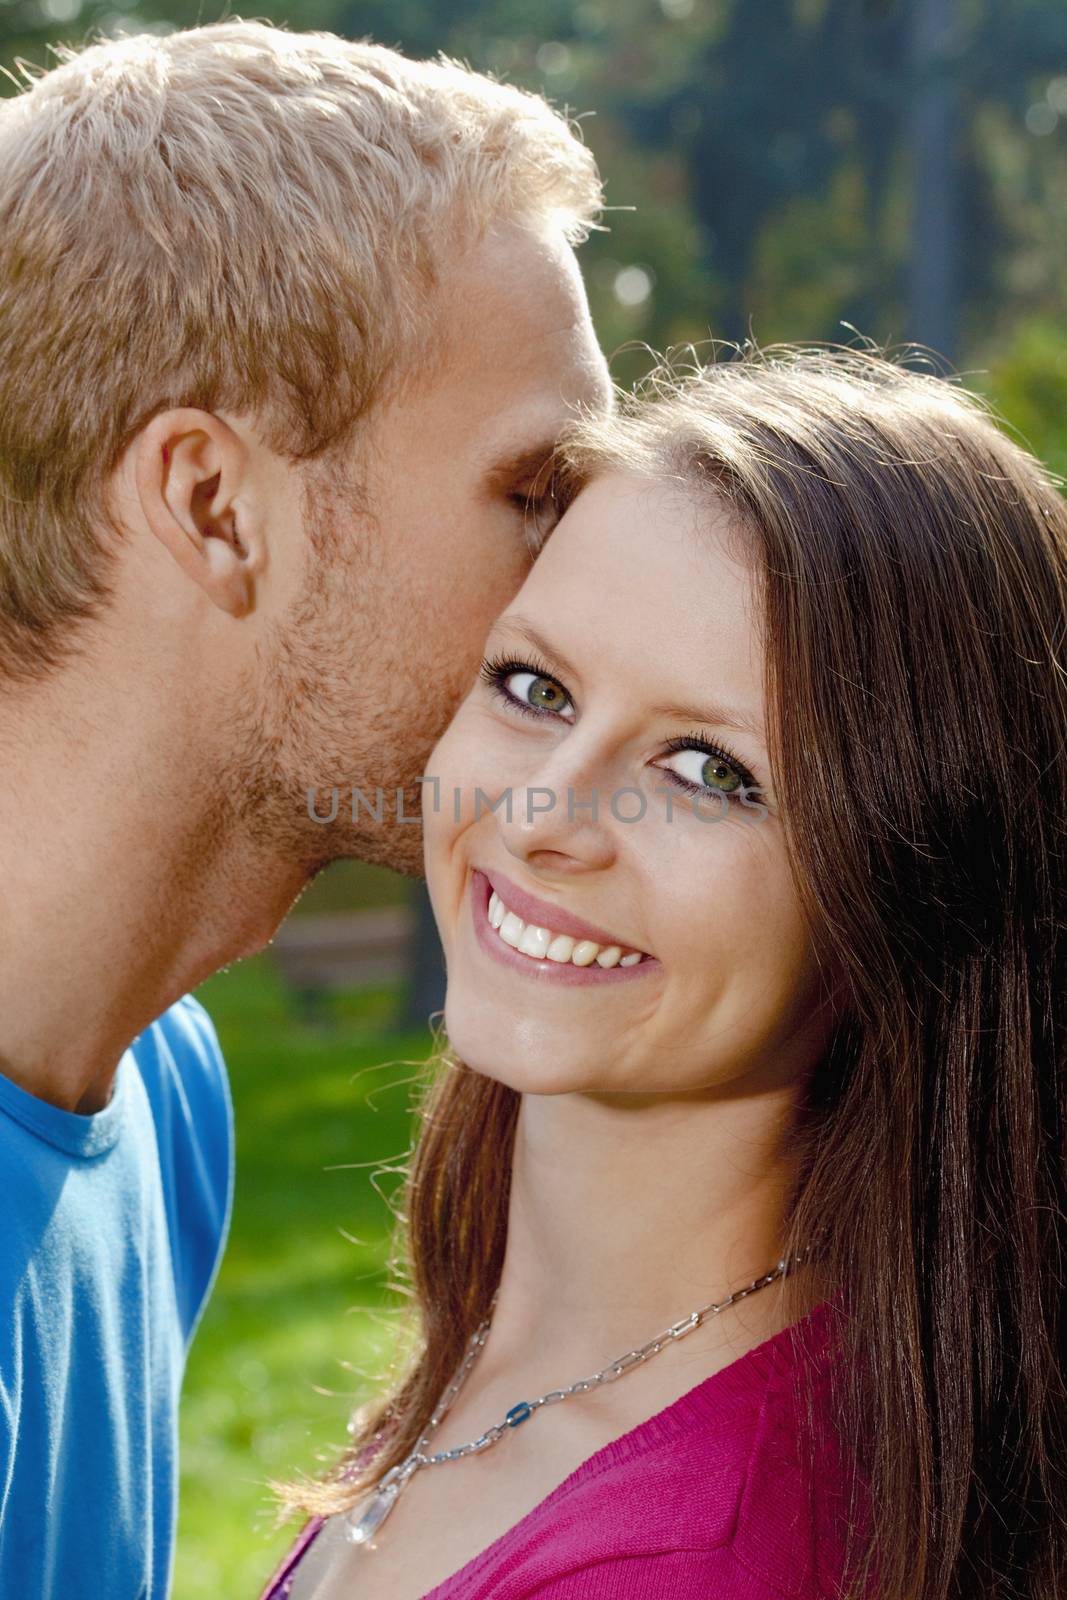 Young Girl Smiling as her Boyfriend Whispers in her Ear.